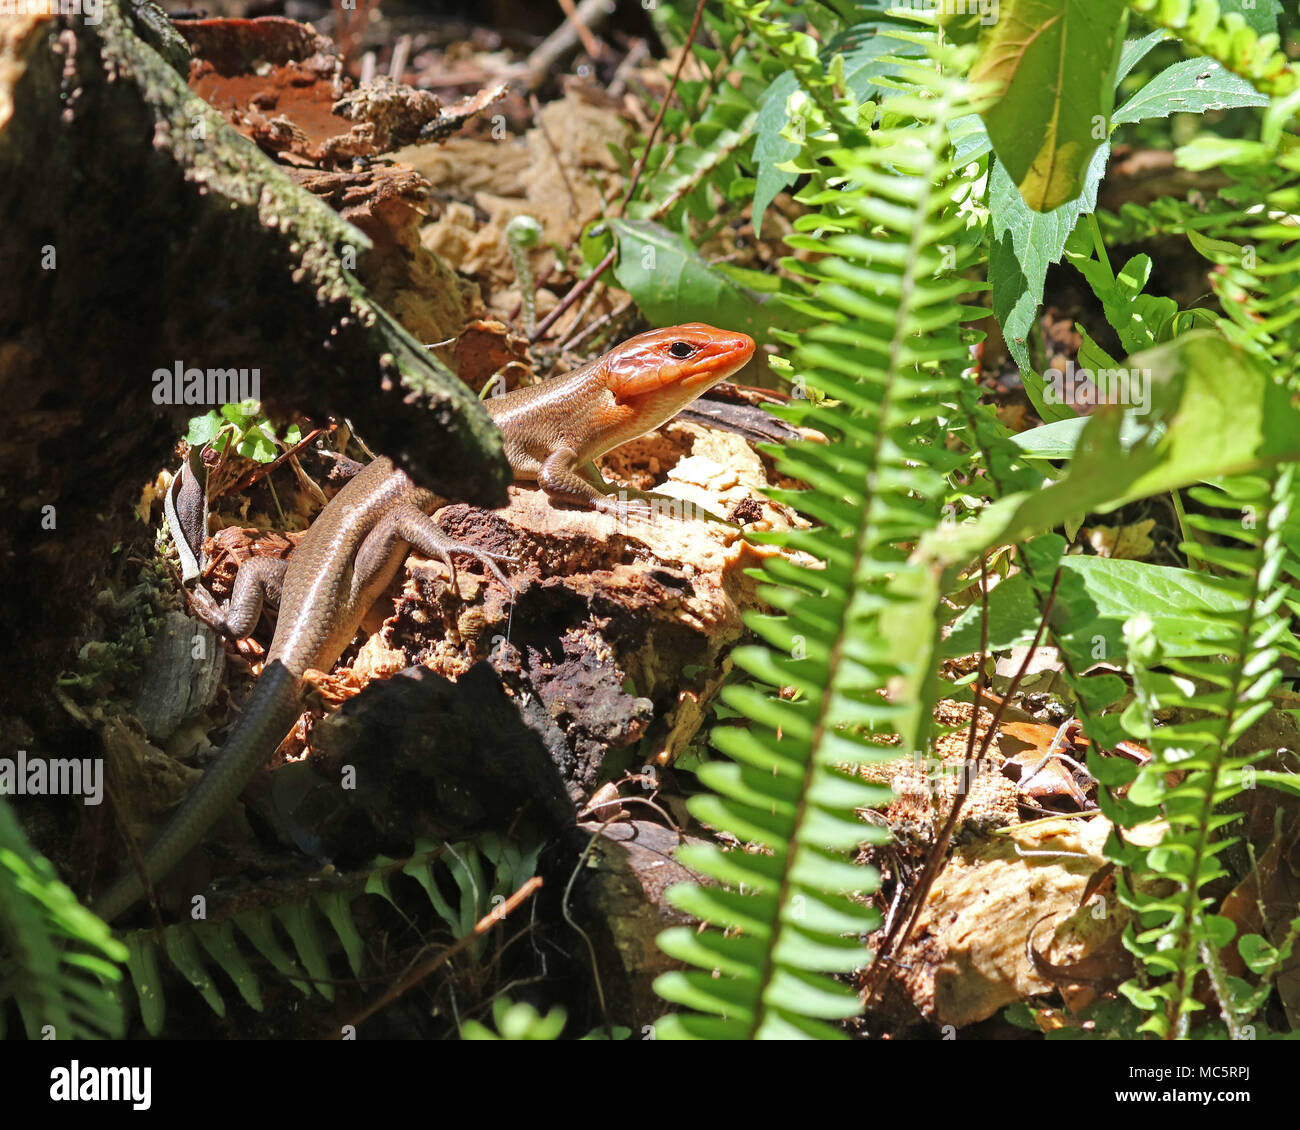 The male Broad-headed skink uses tongue-flicking to follow the female's pheromone trails Stock Photo